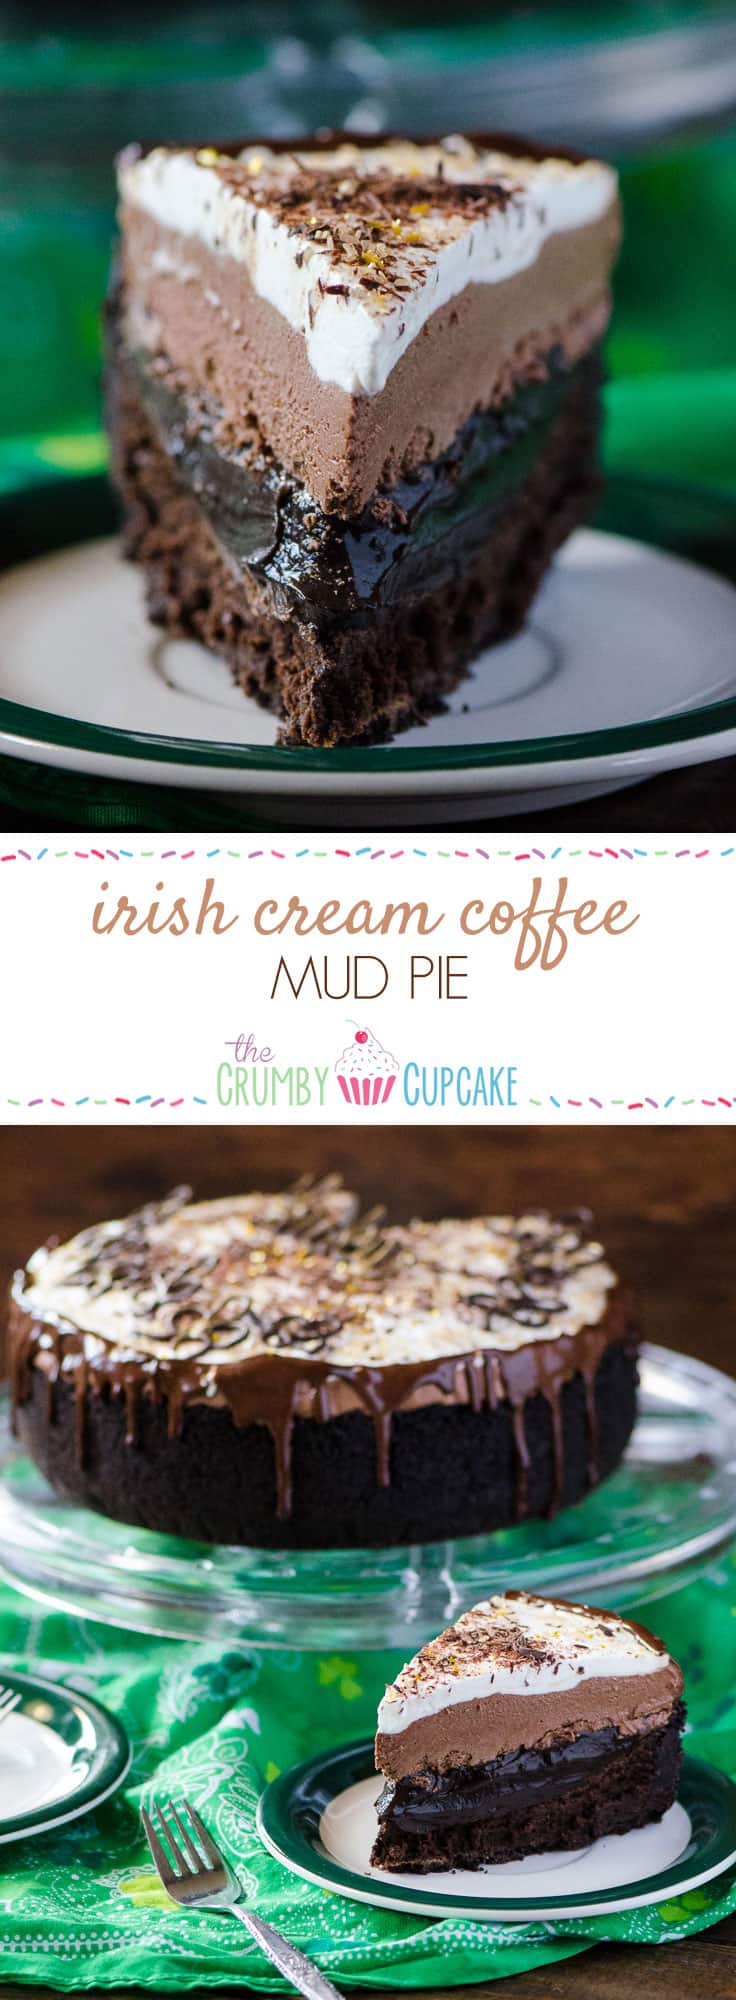 Coffee turned into pie? Chocolate cookie crust, a flourless chocolate whiskey cake, a layer of chocolate espresso pudding, an Irish cream chocolate mousse, topped off with a sweet whipped cream - it's a chocoholic's dream!